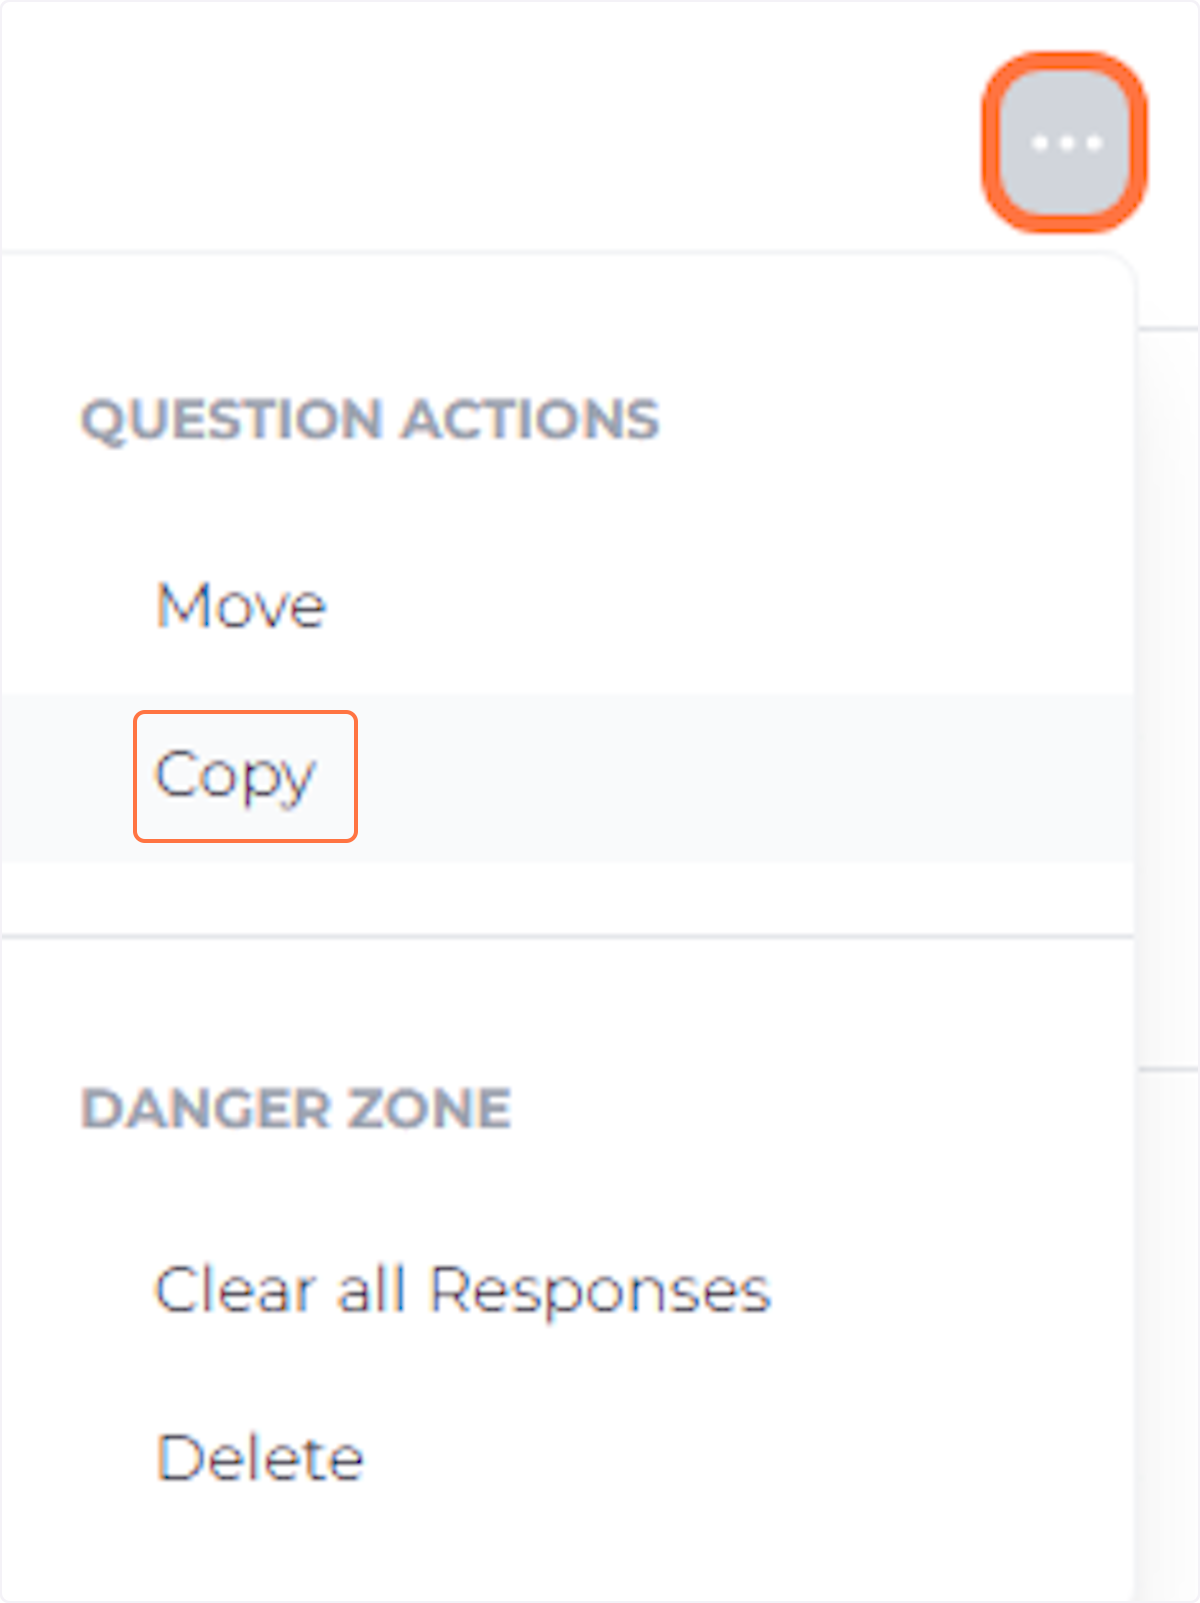 Open the 'Question Actions' menu and click 'Copy'.